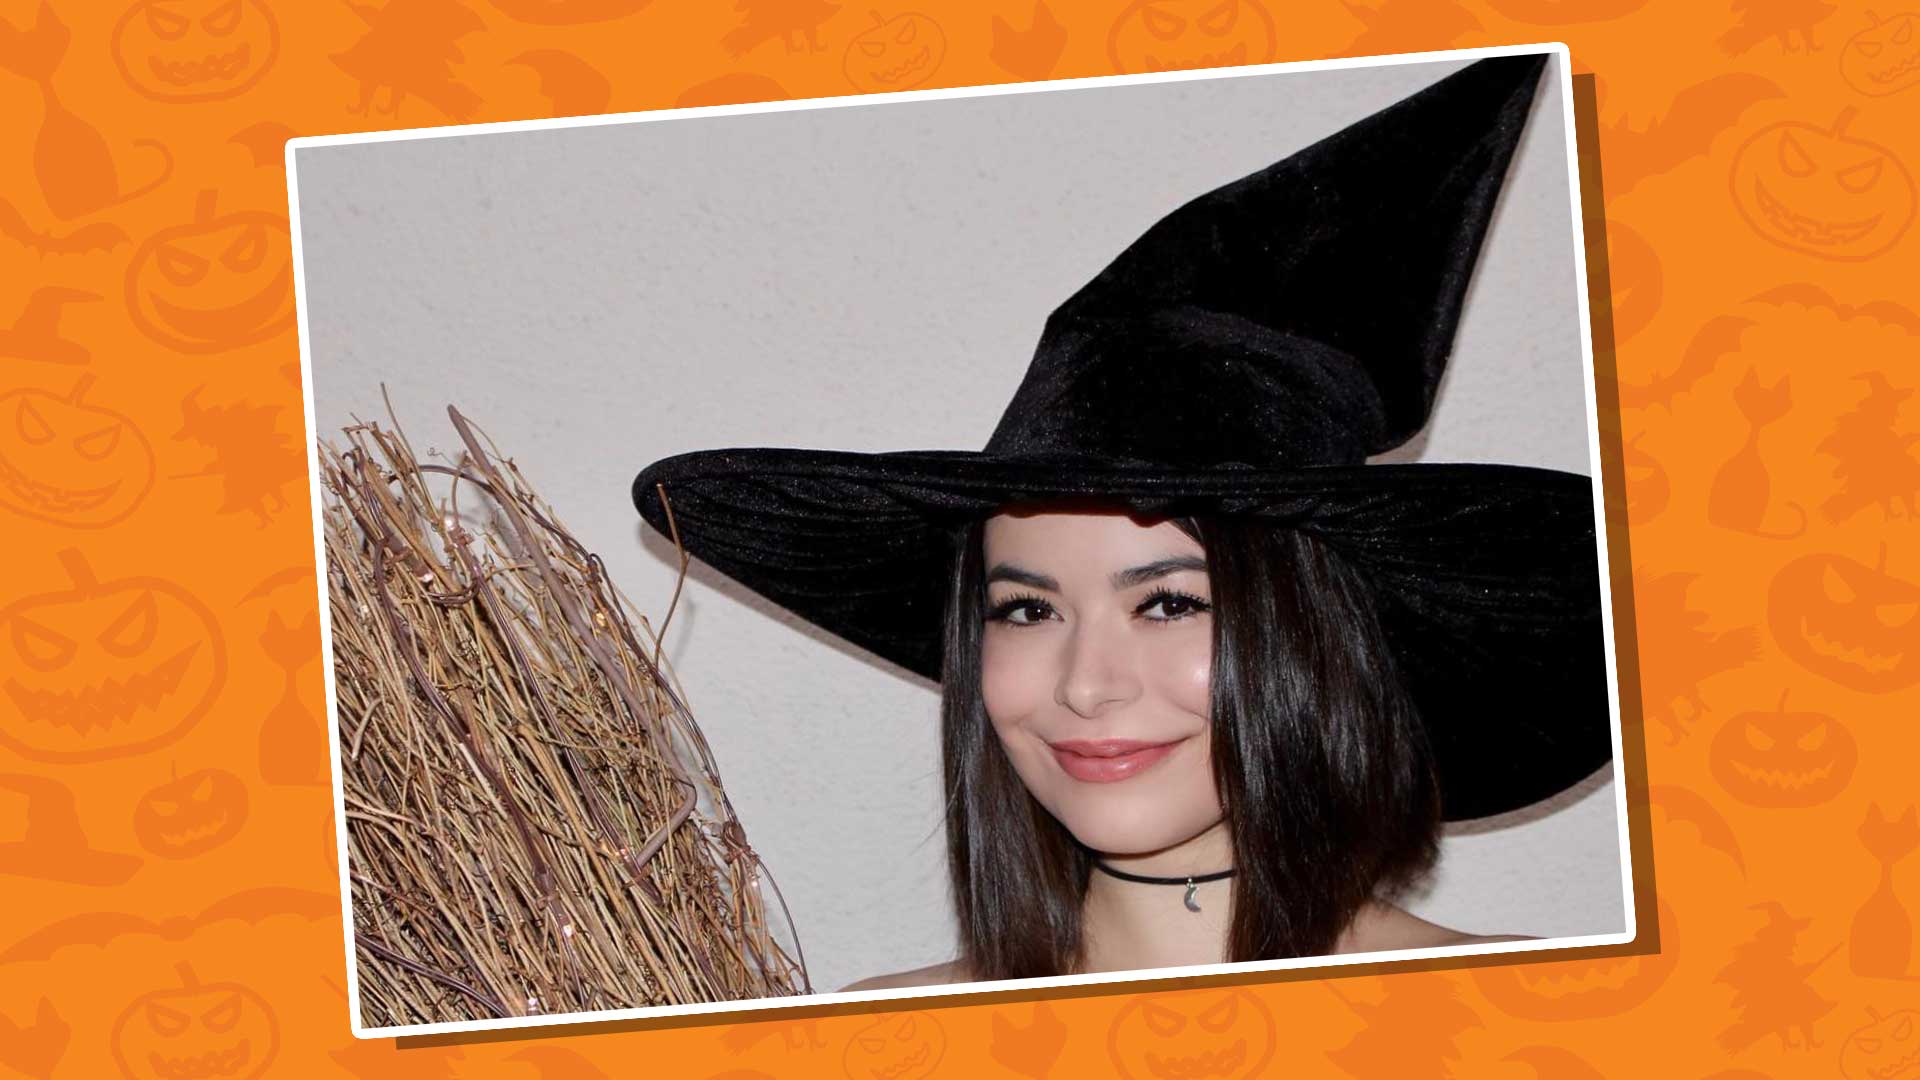 Miranda Cosgrove dressed as a witch with a broom